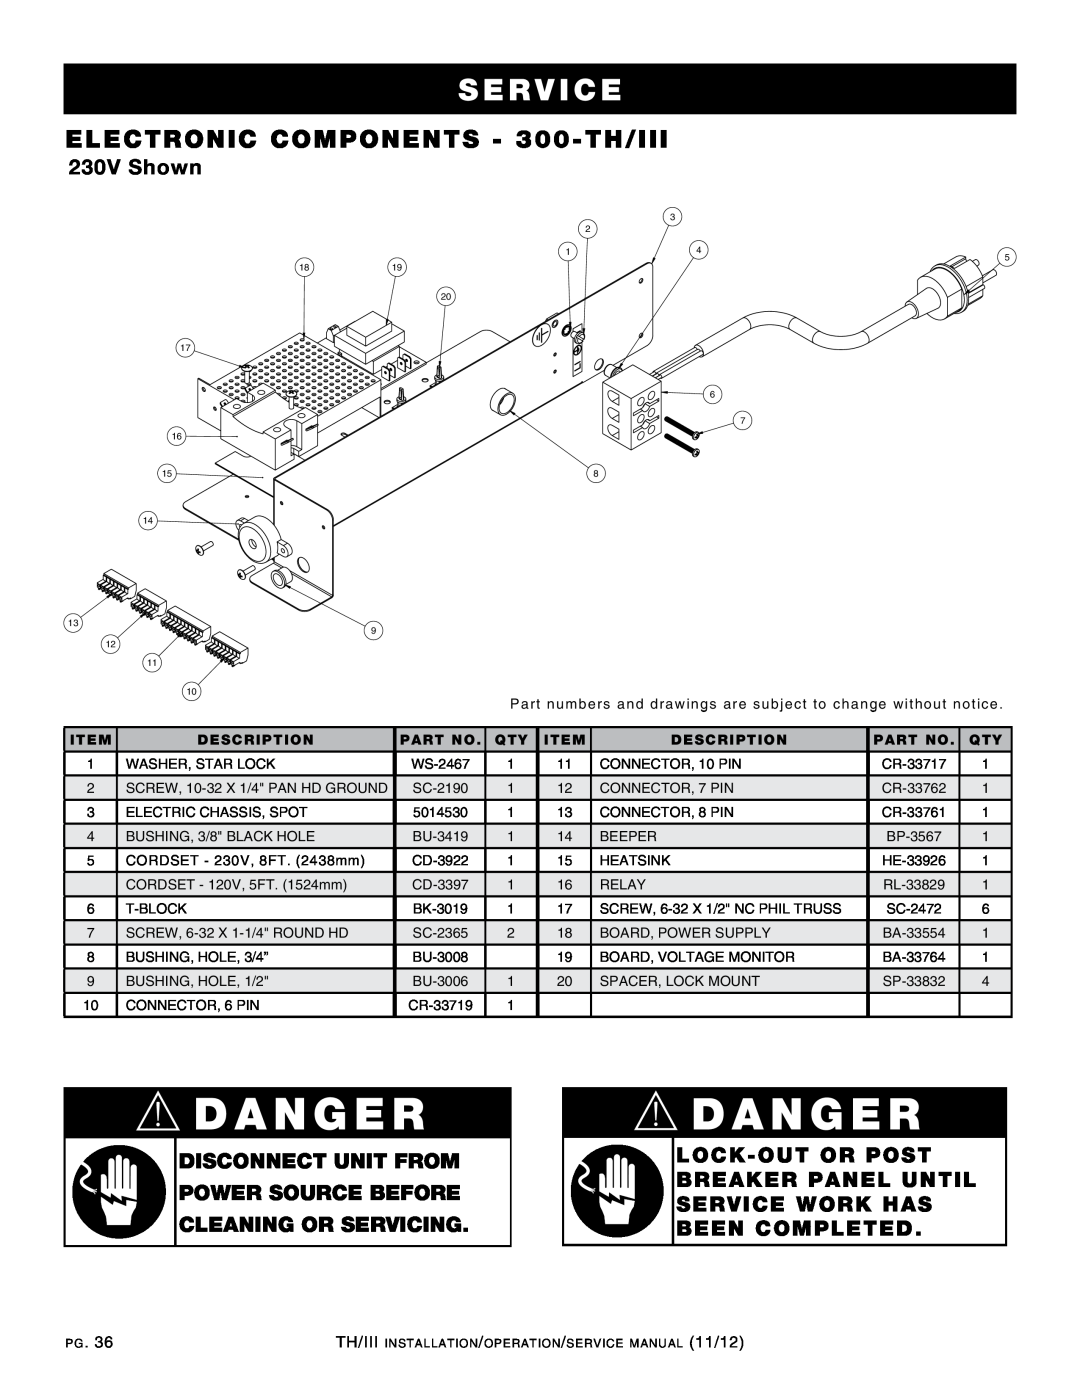 Alto-Shaam 750-TH/III manual ELECTRONIC COMPONENTS - 300-TH/III, 230V Shown, dANgER, Se r v ice, cLEANINg OR SERVIcINg 